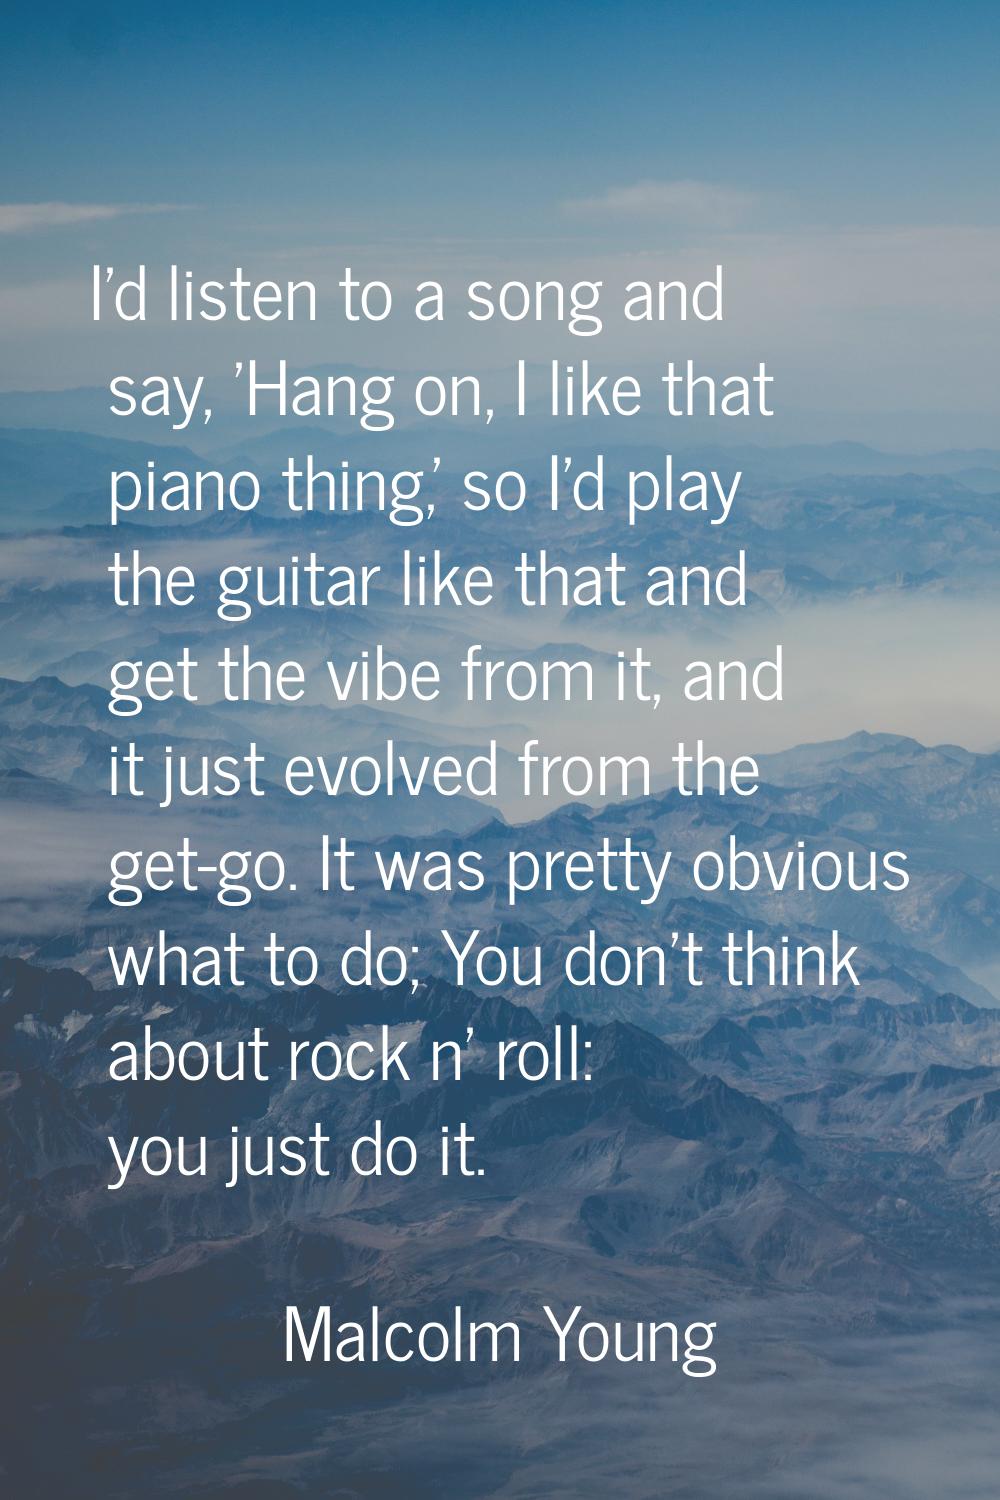 I'd listen to a song and say, 'Hang on, I like that piano thing,' so I'd play the guitar like that 